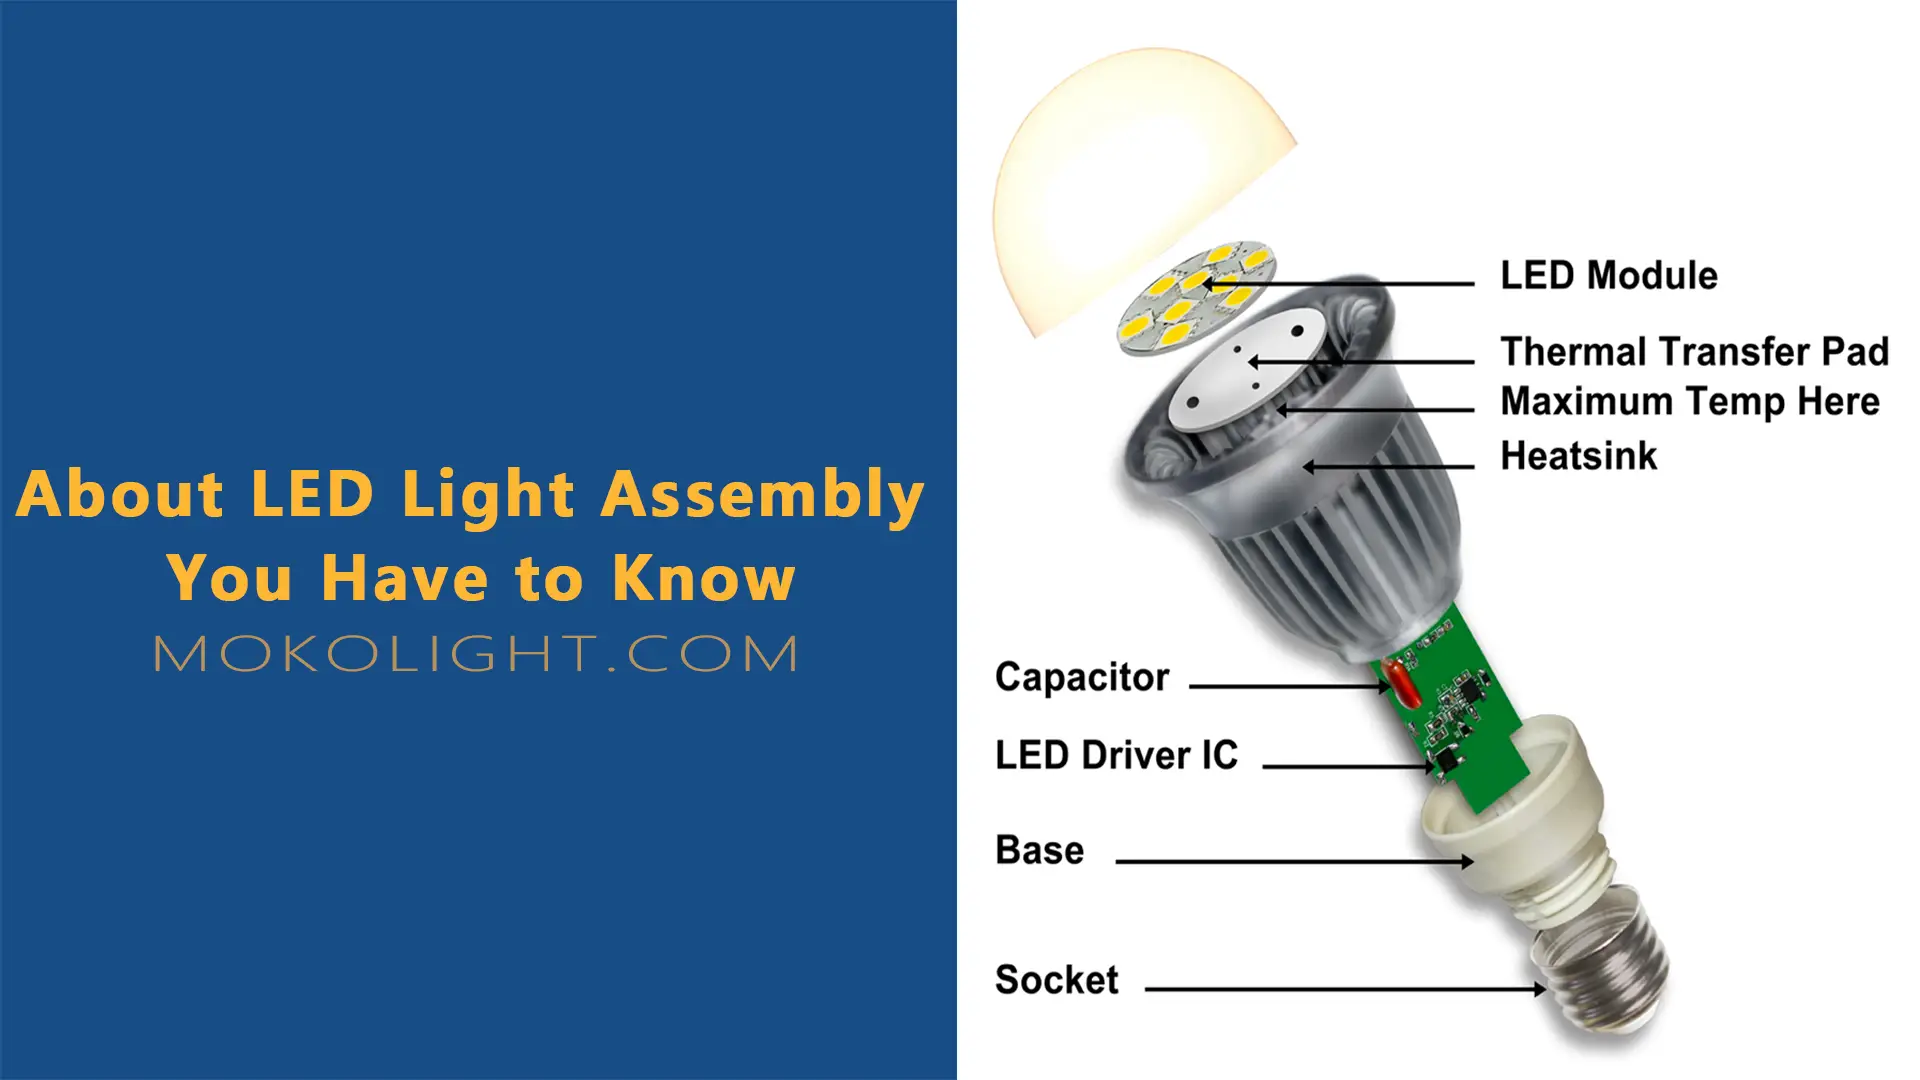 About LED Light Assembly You Have to Know